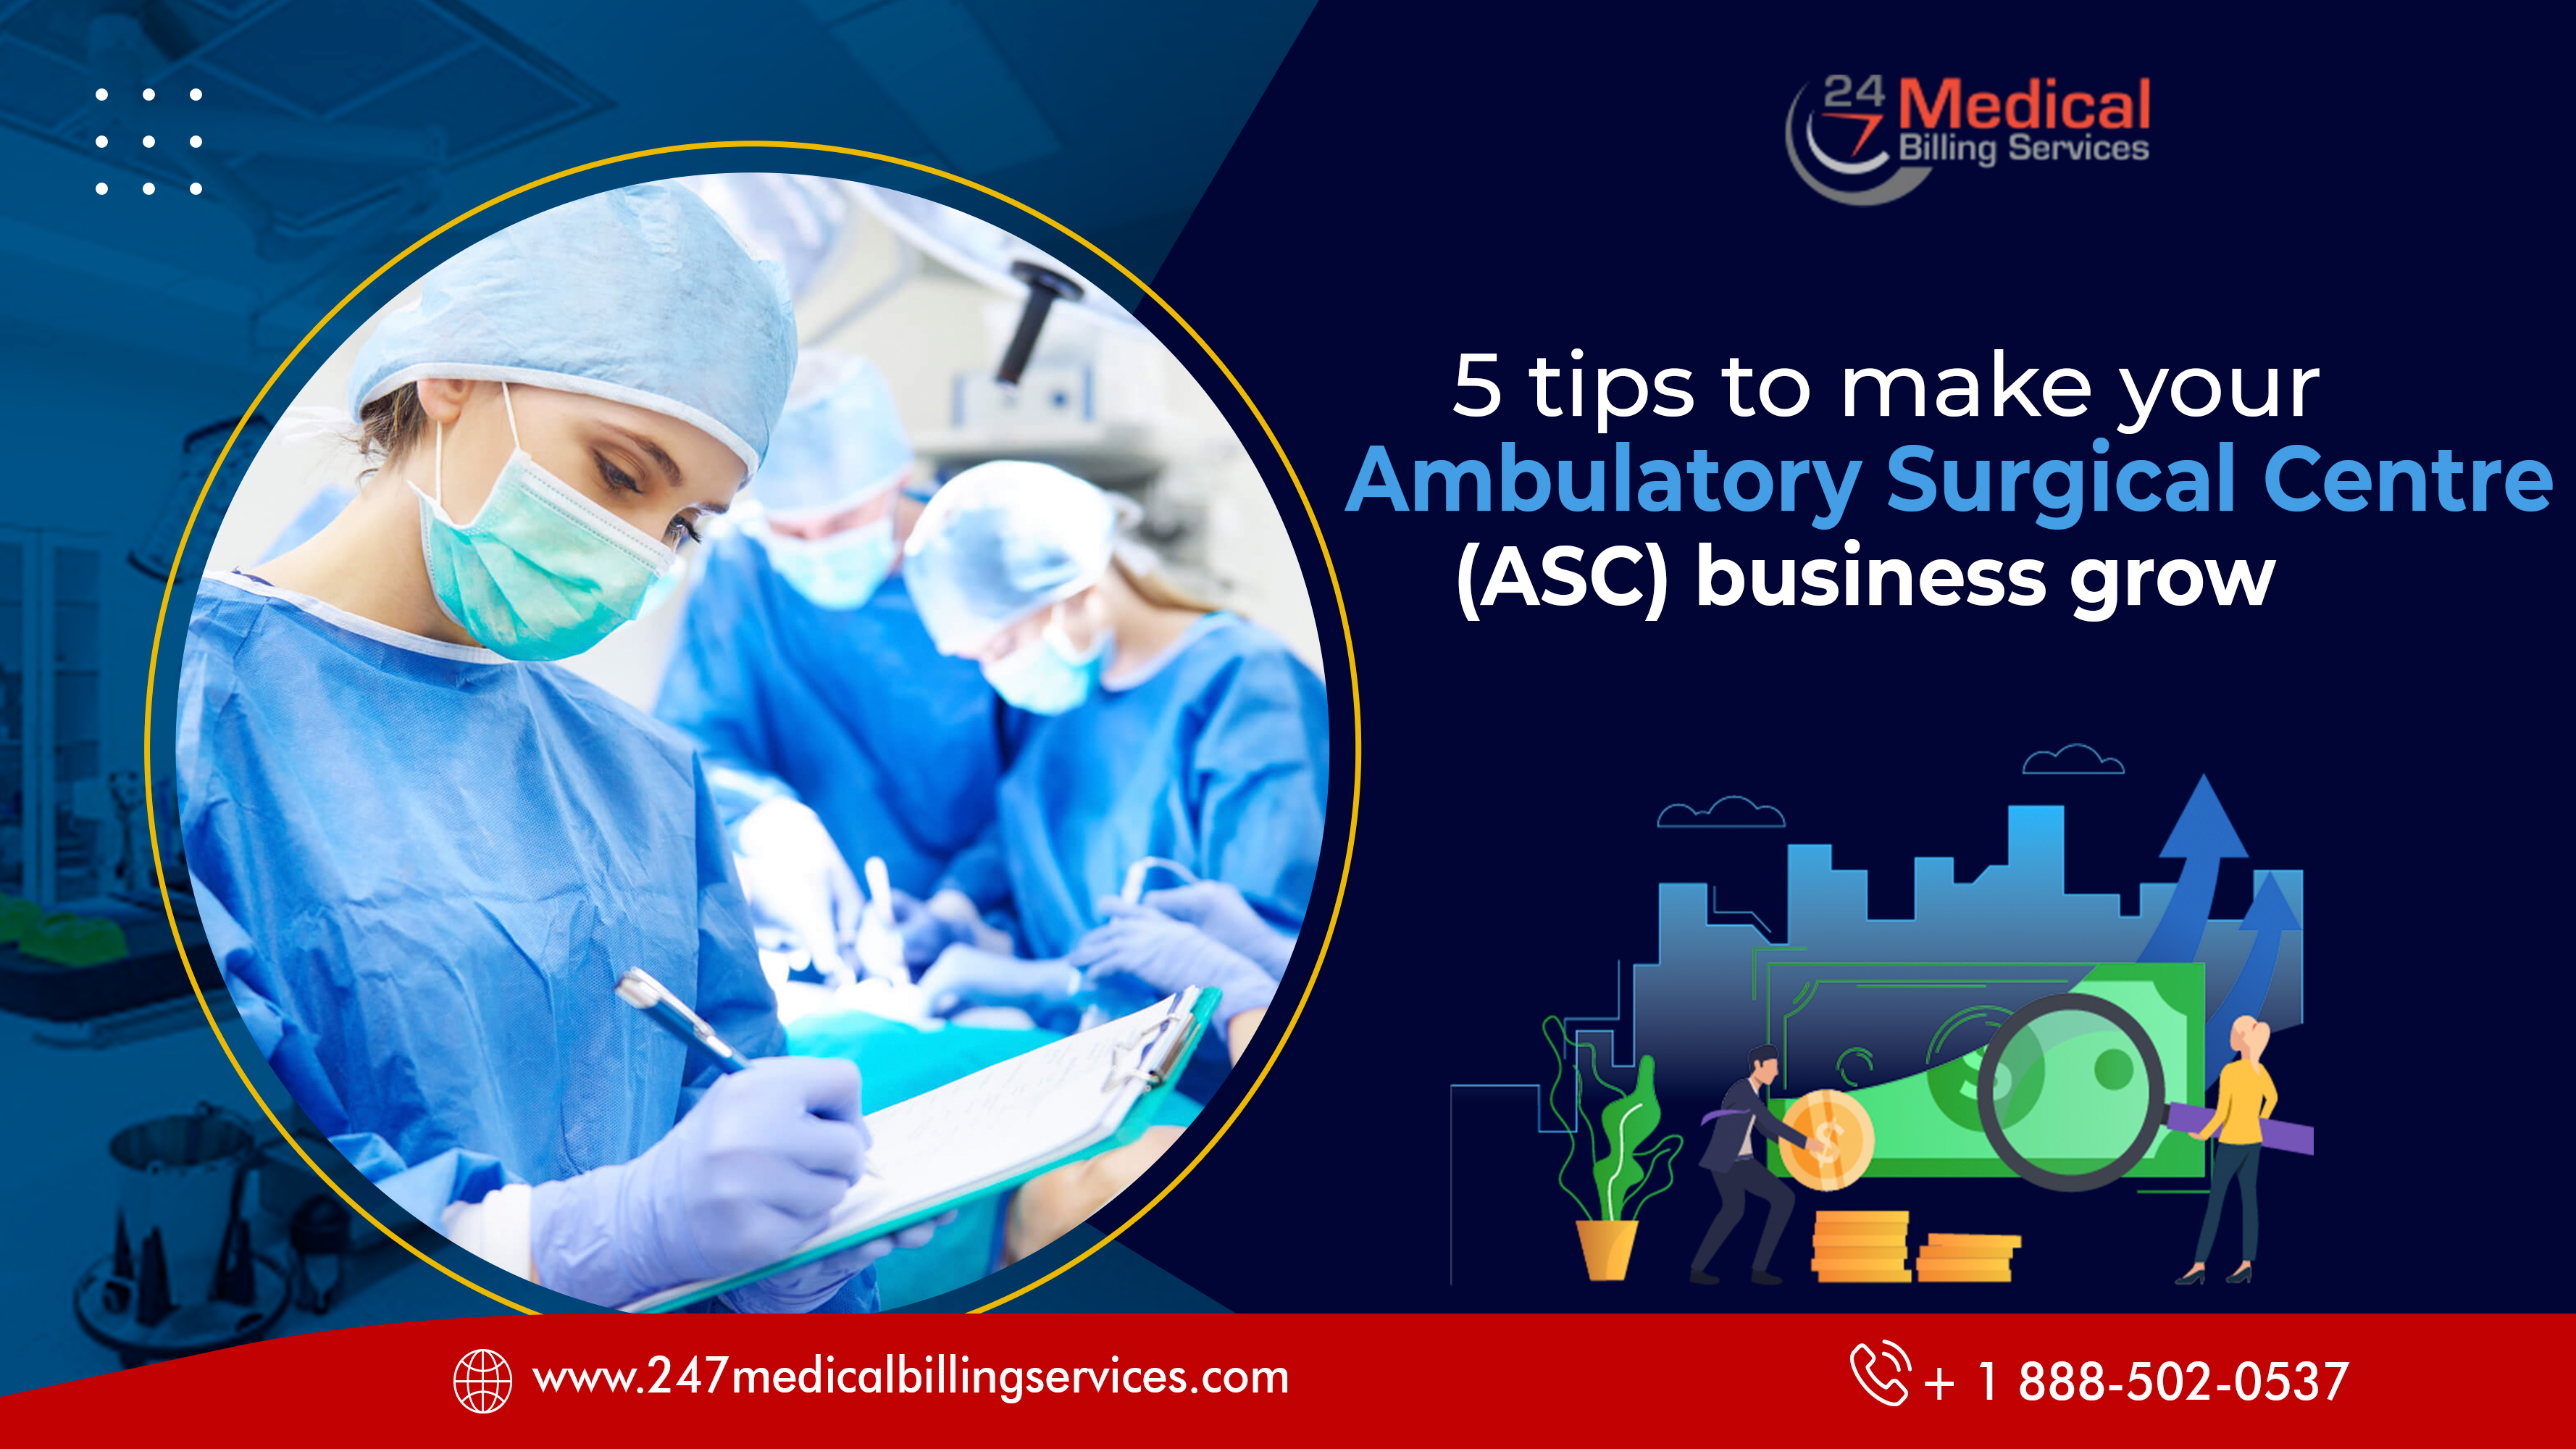  5 Tips to Make Your Ambulatory Surgical Centre (ASC) Business Grow